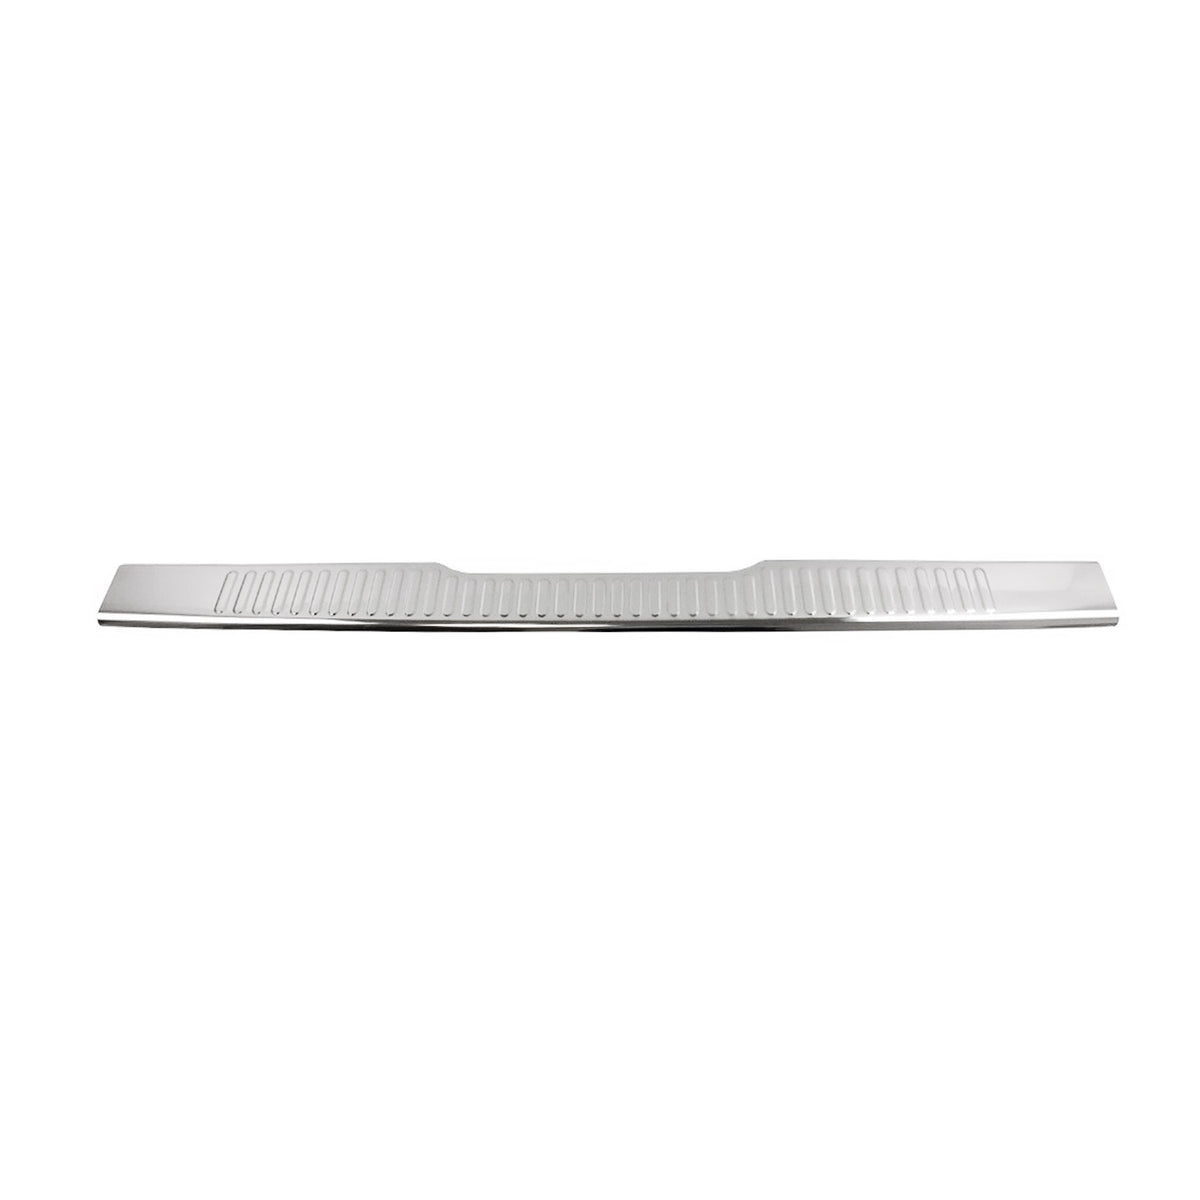 Loading sill protection for Mercedes Viano W639 2003-2014 standard stainless steel chrome